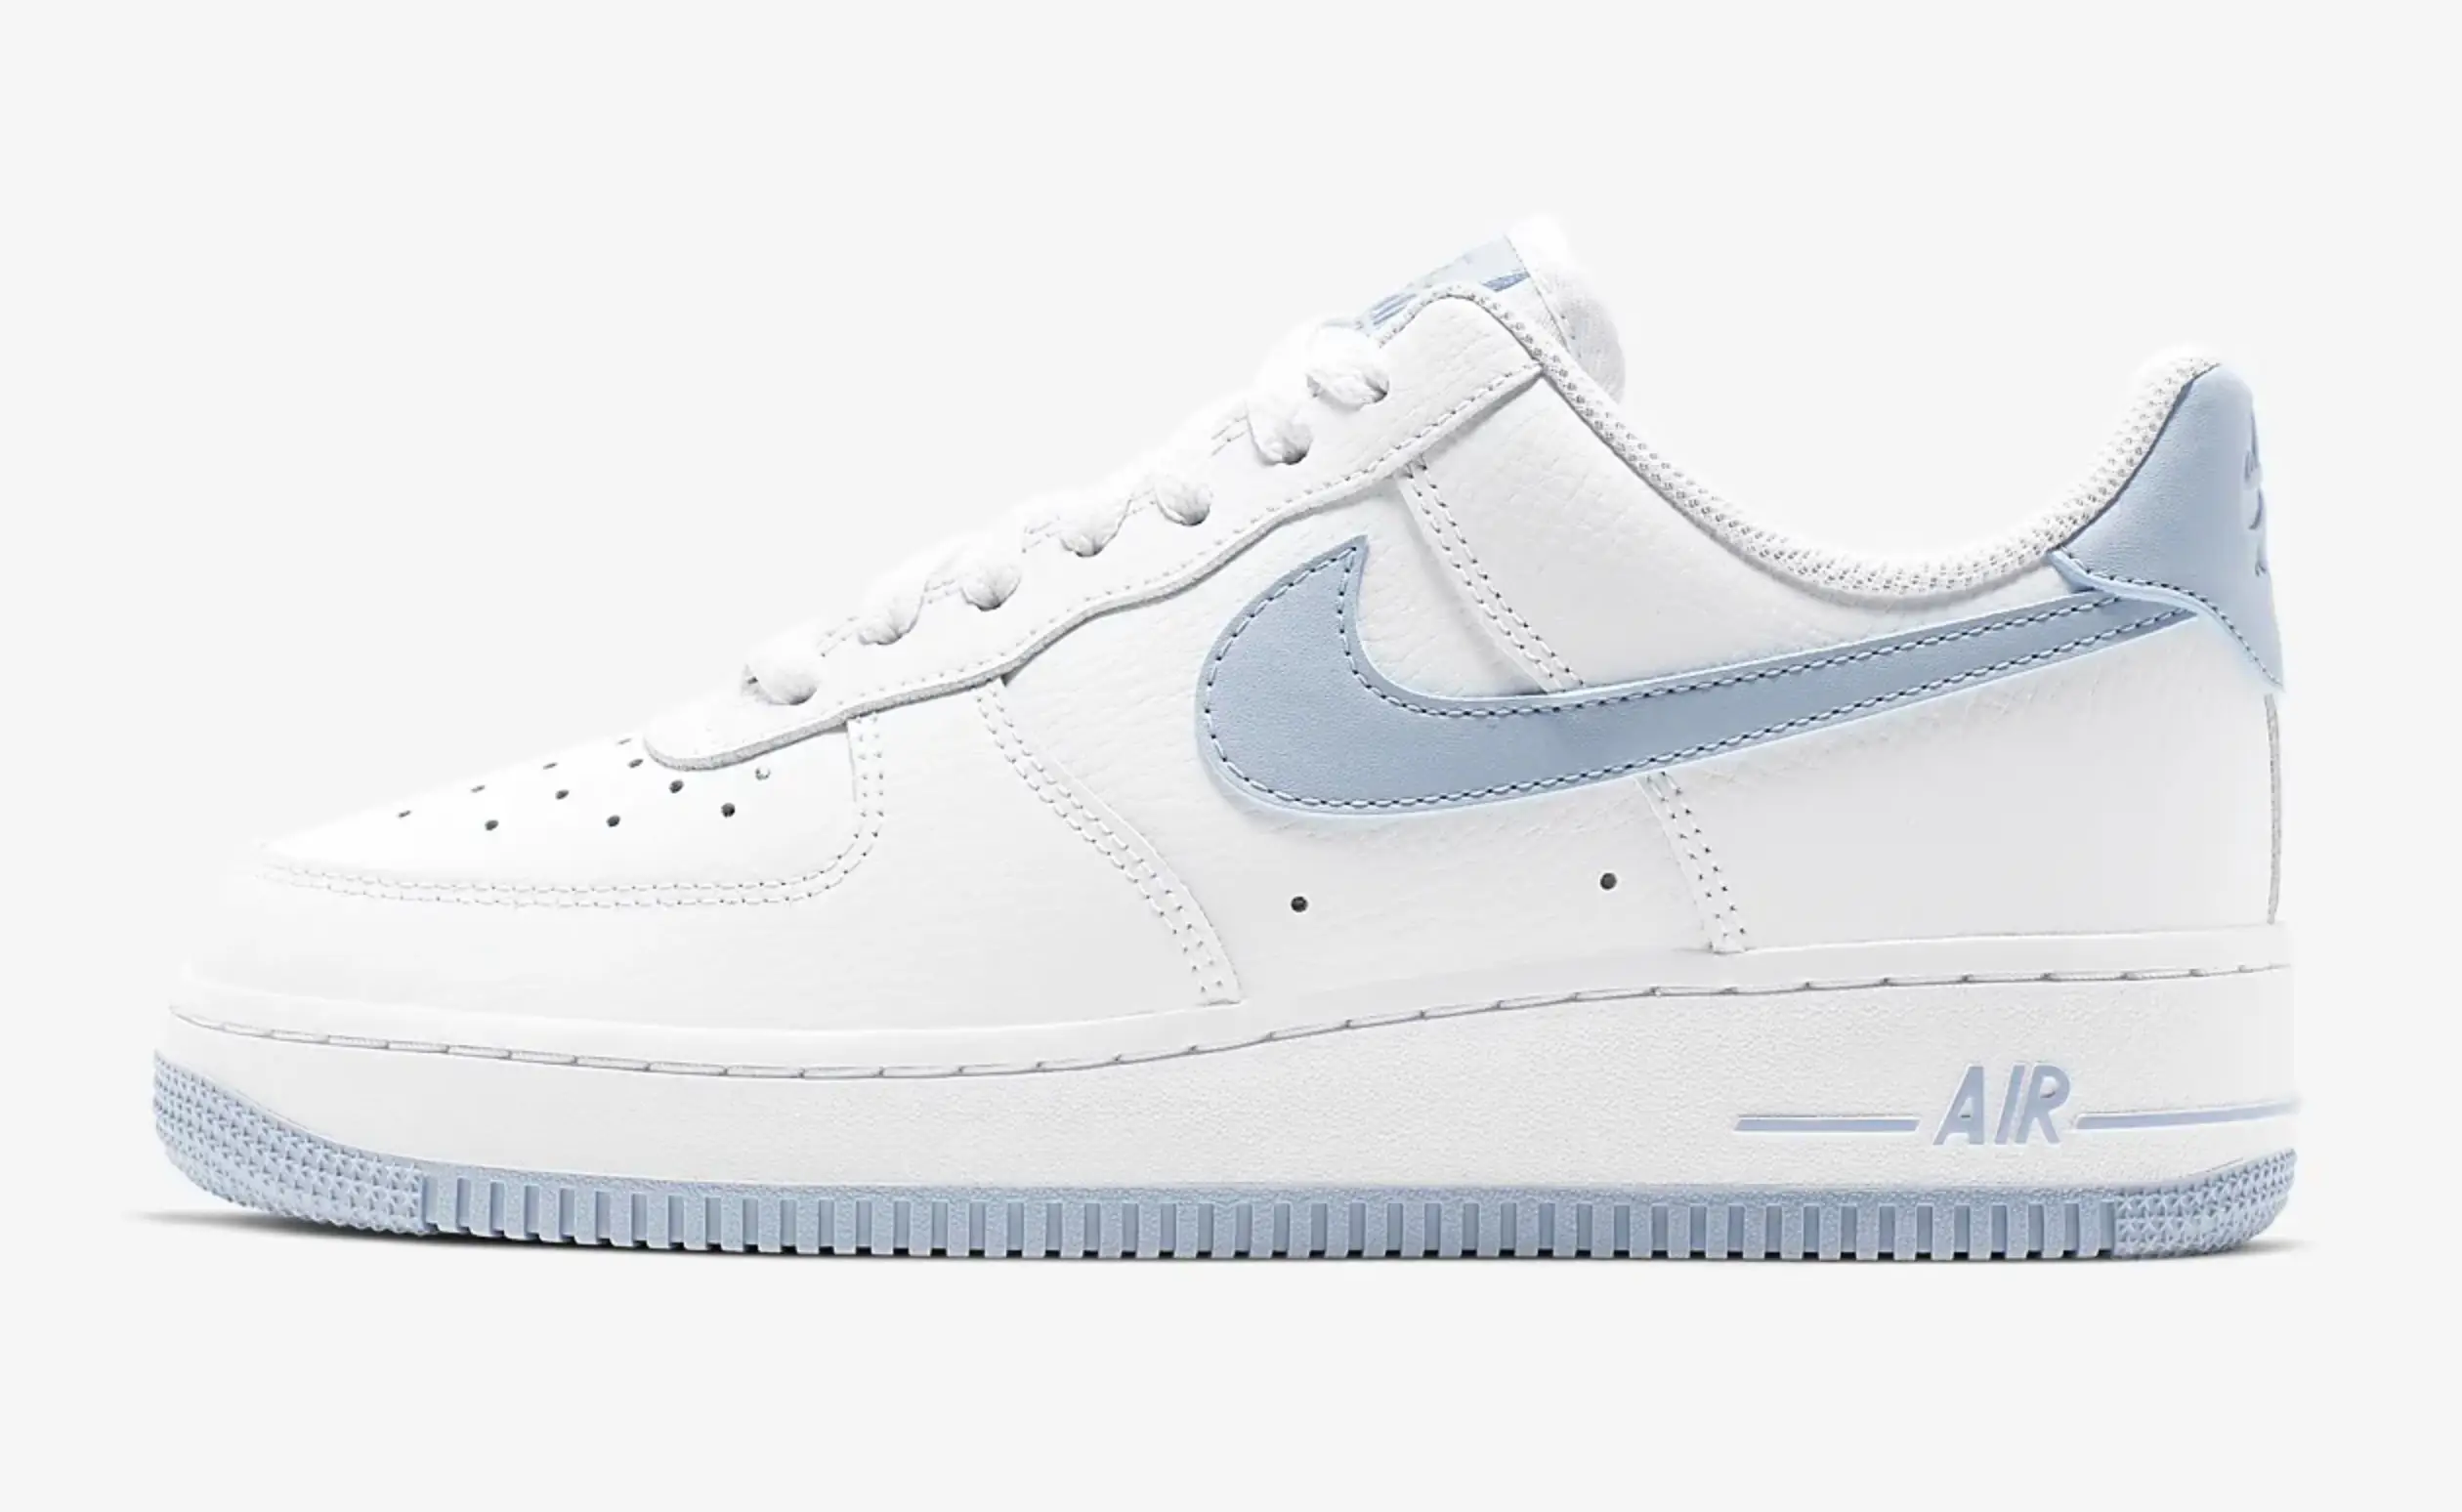 This Nike Air Force 1 Is Unmissable This Season | The Sole Supplier